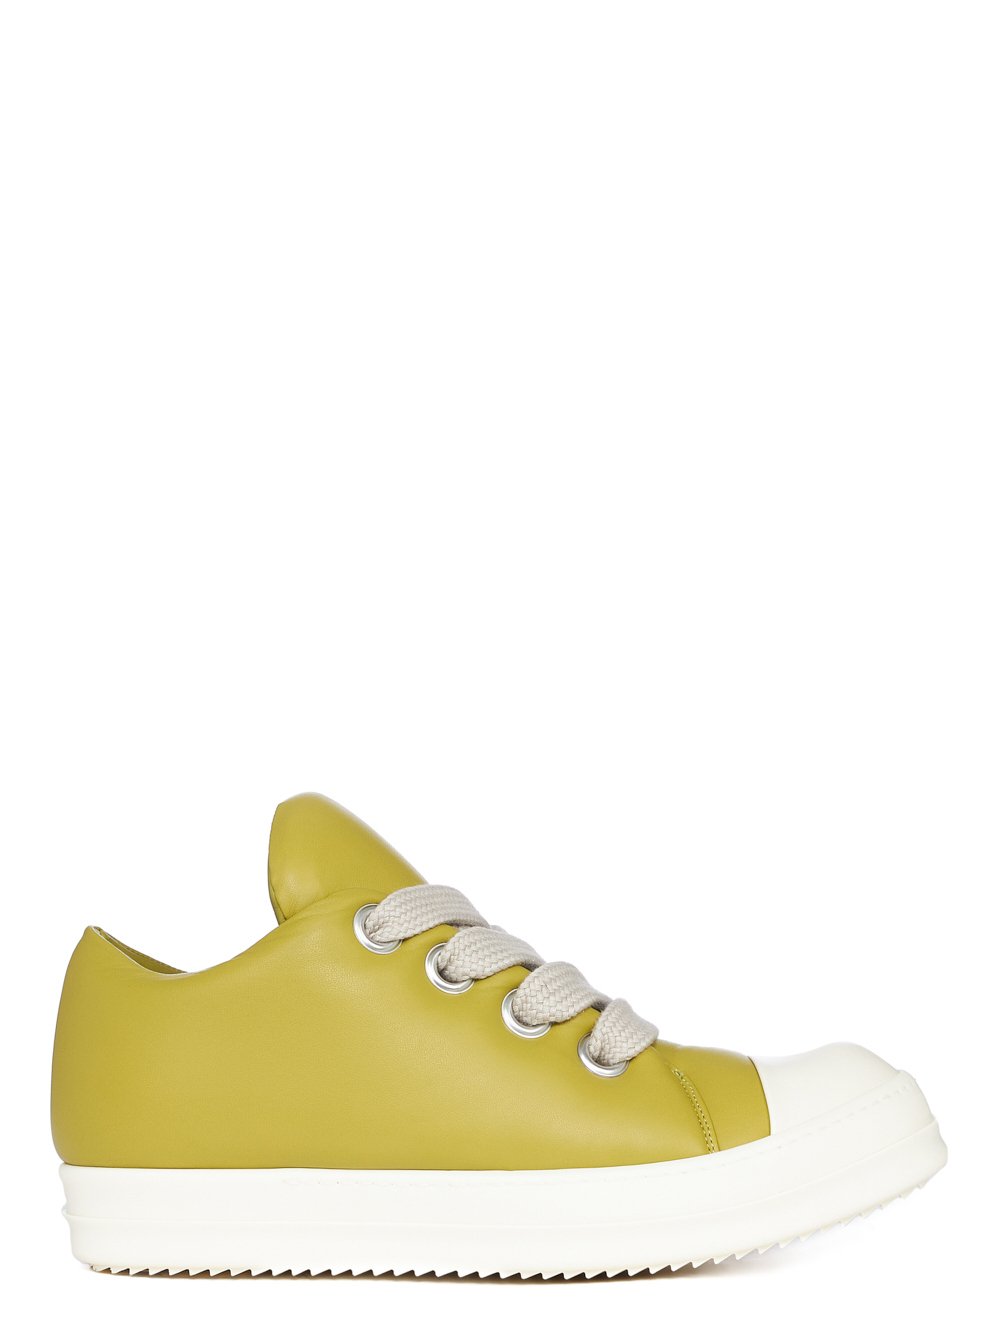 RICK OWENS FW23 LUXOR JUMBO LACE PADDED LOW SNEAKS IN ACID AND MILK PEACHED LAMBSKIN